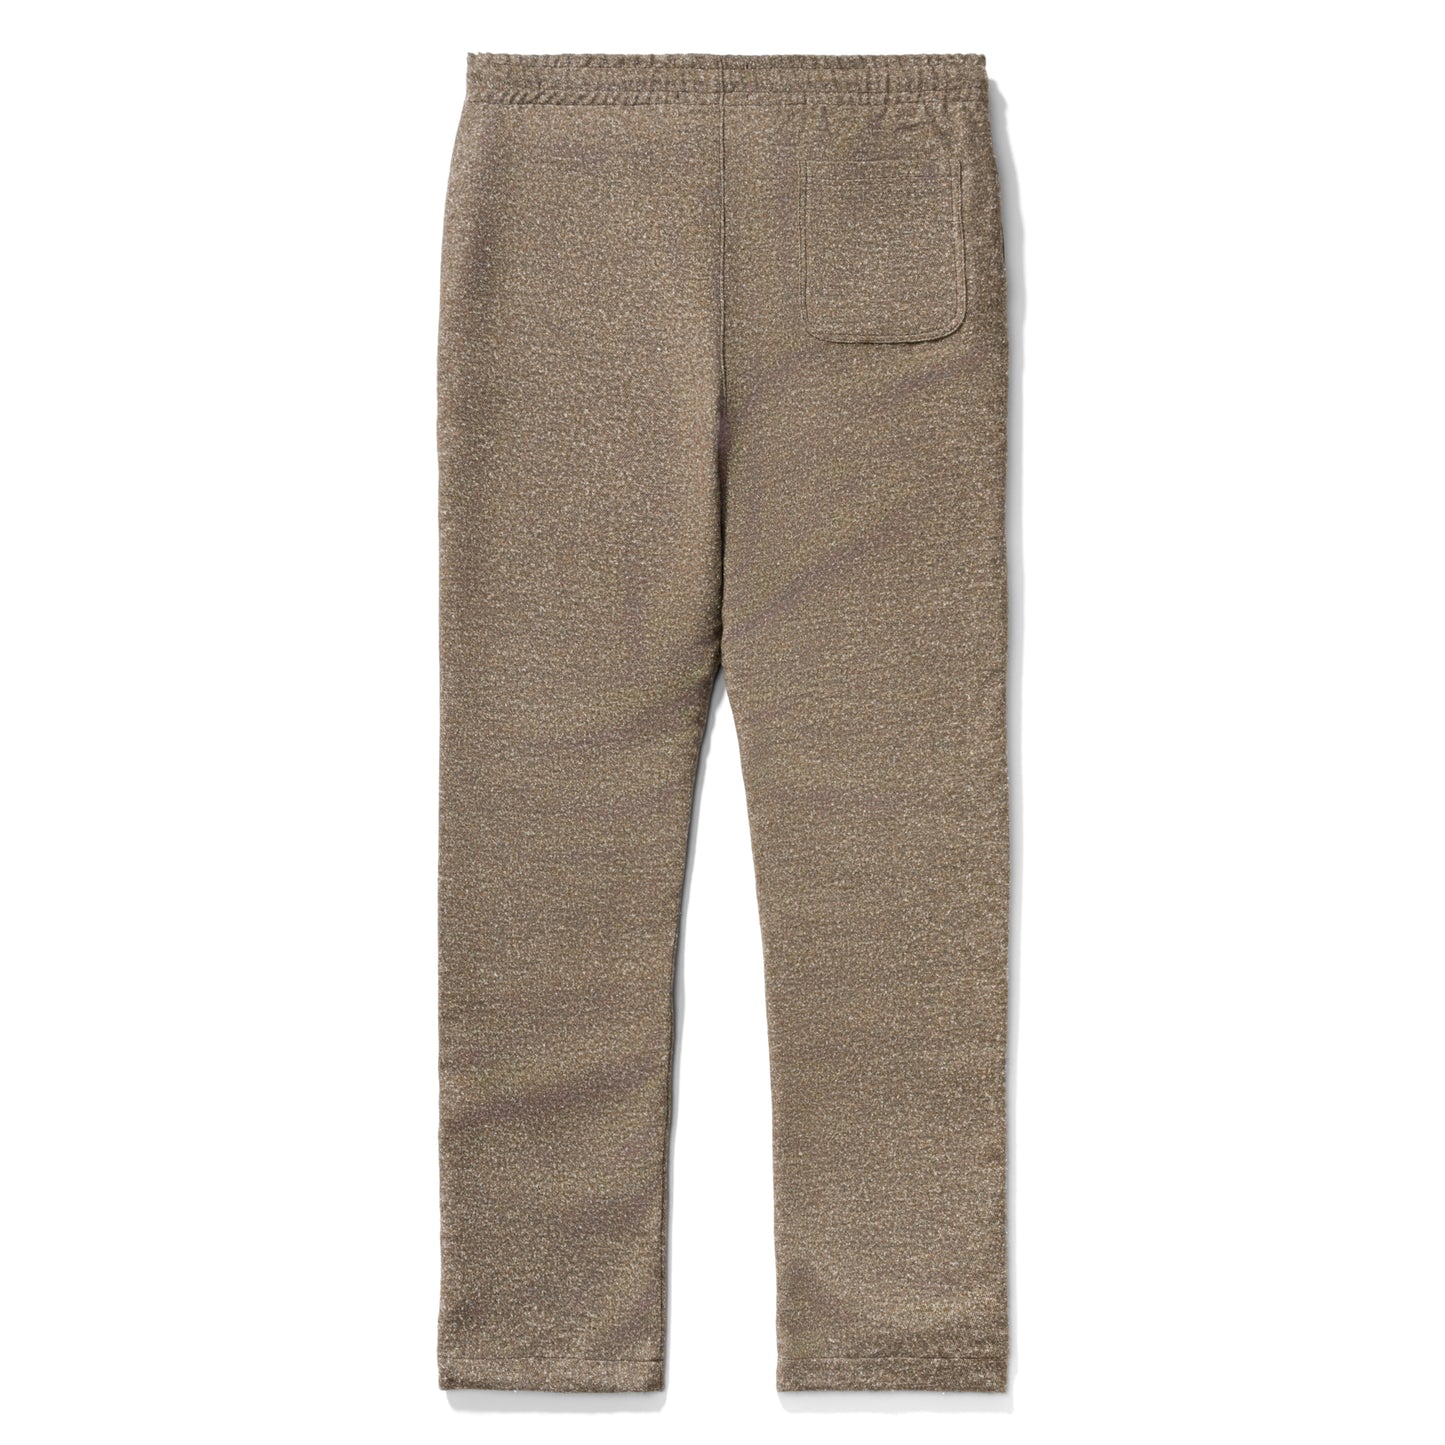 Concepts Chino Pant (Brown/Mulch)